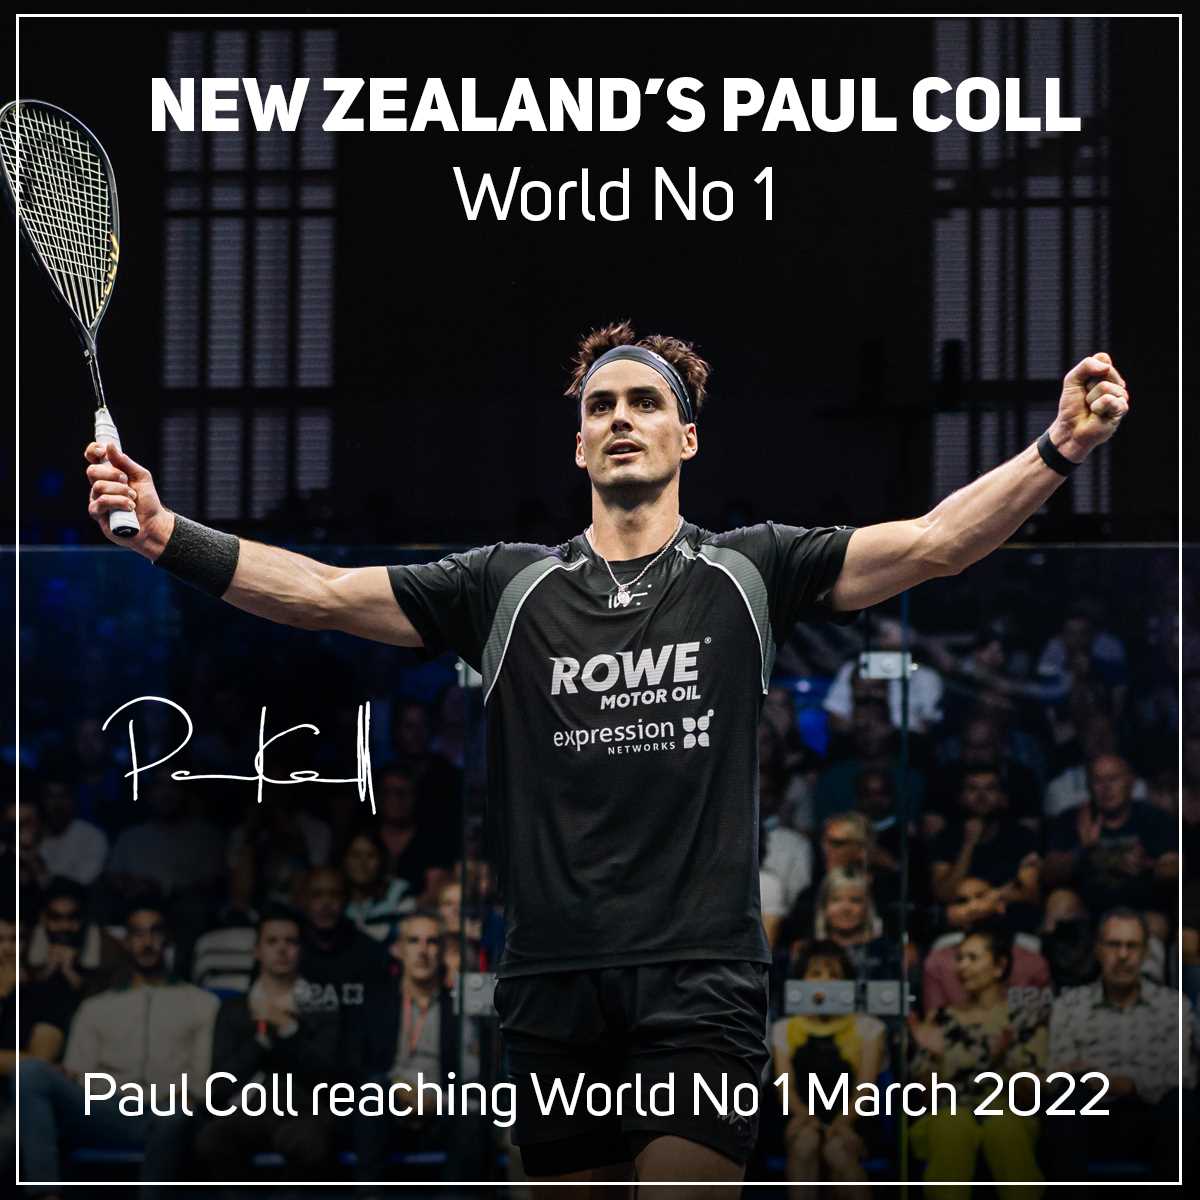 Paul Coll - World Number 1